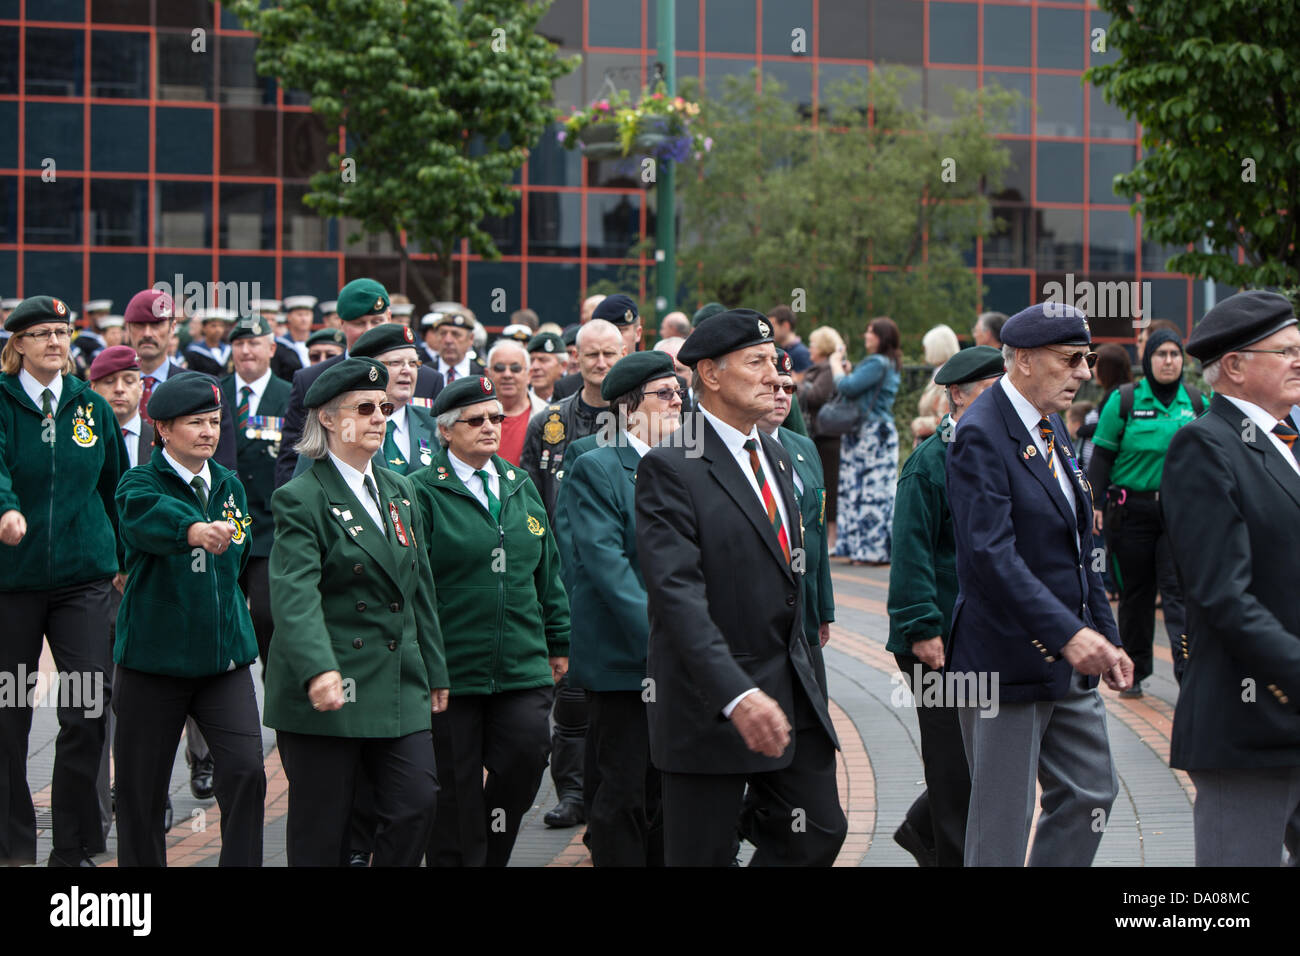 Birmingham, UK. 29th June, 2013. Veterans on parade for Armed Forces Day in Birmingham. Credit:  Chris Gibson/Alamy Live News Stock Photo